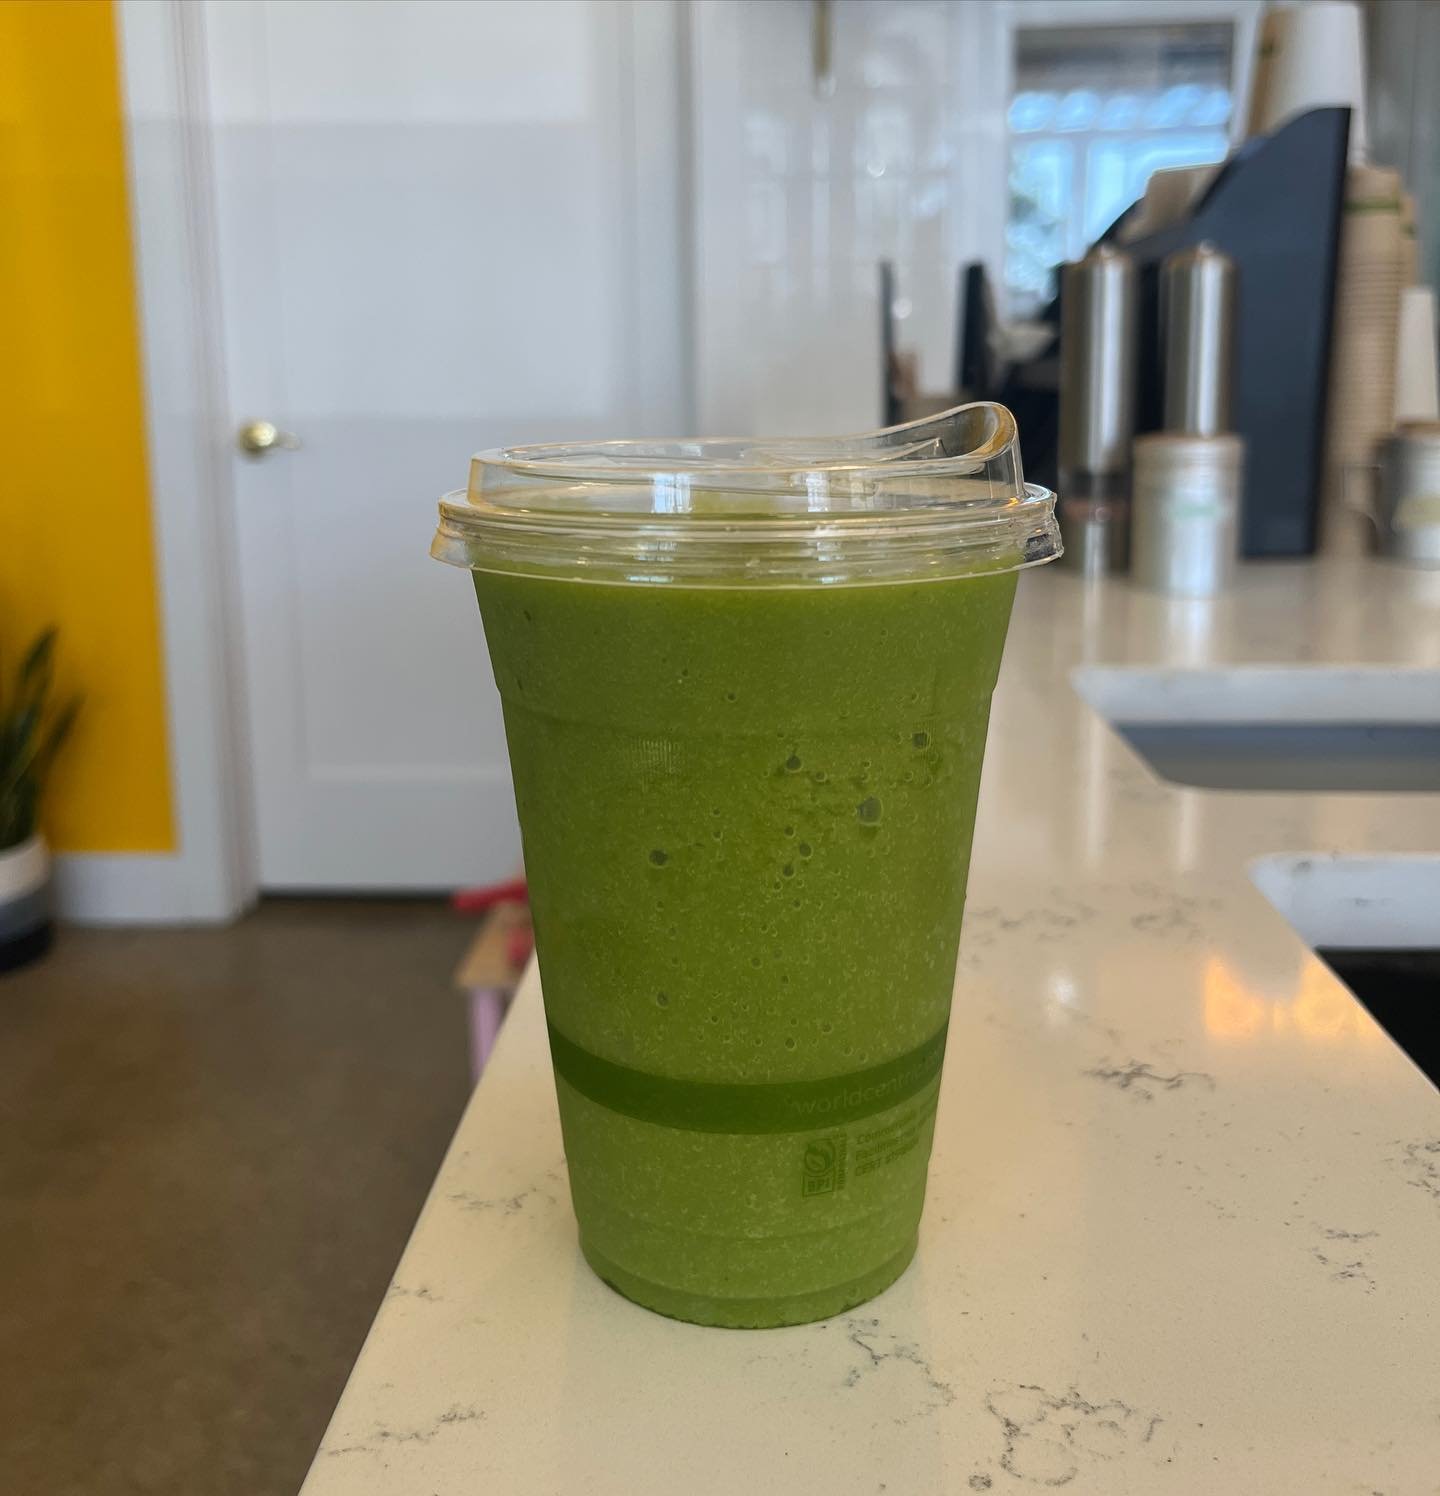 Our new green smoothie is packed with nutrients from avocado, pineapple, cucumber, spinach, and agave! 

#greensmoothie #juicery #coldpressed #smoothieshop #vegan #nutrition #pittsburgheats